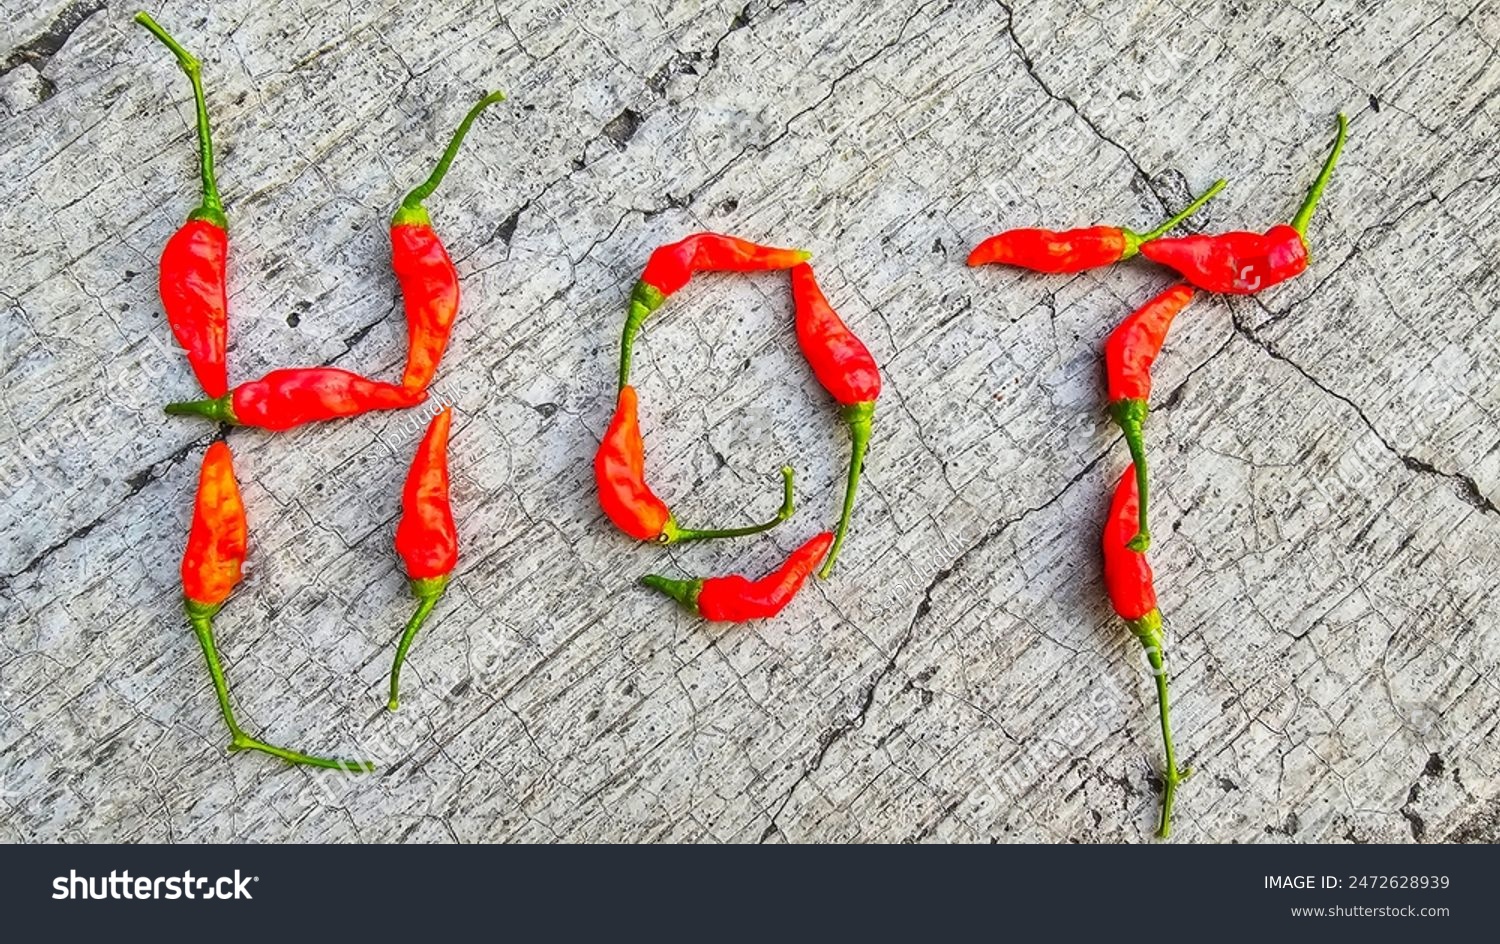 Red chili peppers arranged to spell the word "HOT" on a textured concrete surface, symbolizing spiciness and heat. This creative food arrangement highlights the vibrant colors and natural shape of the